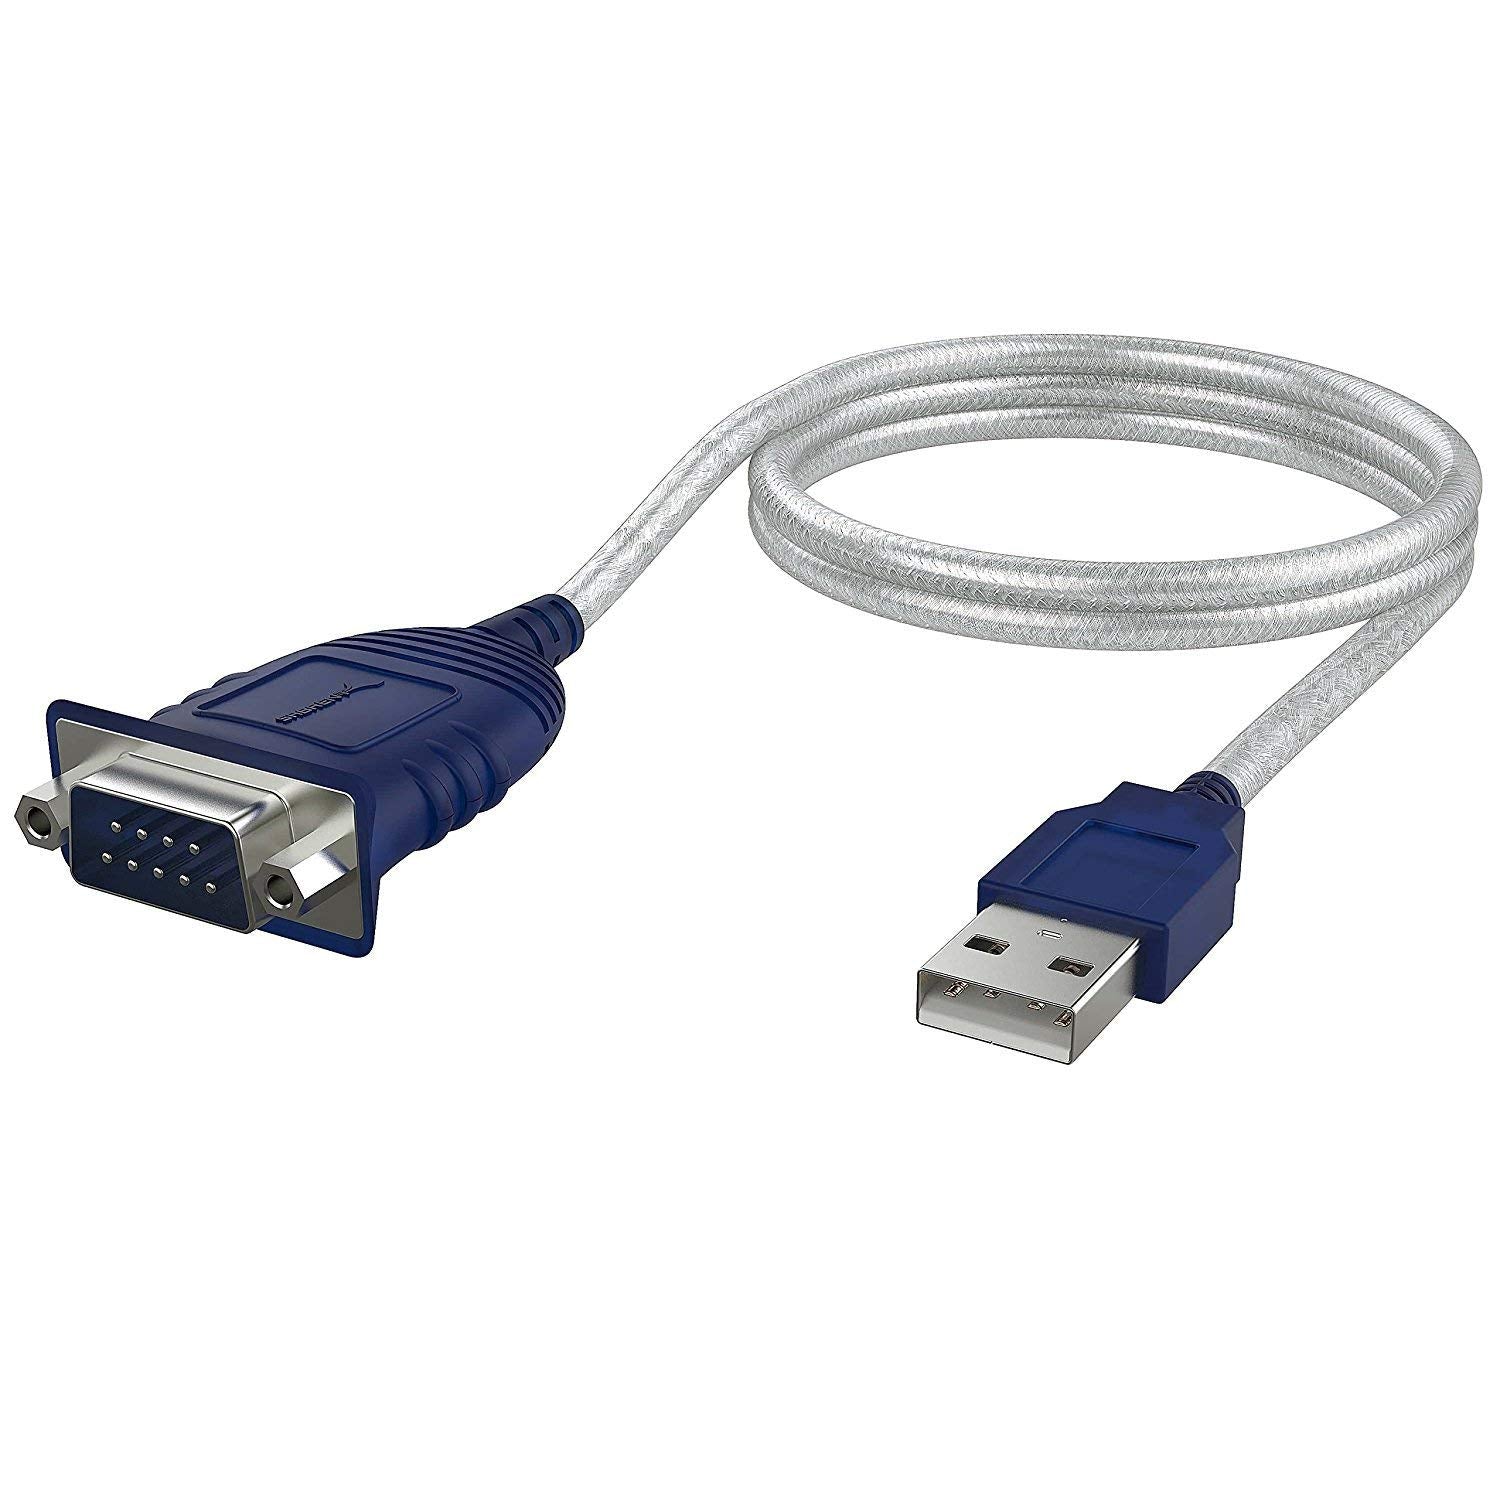 Sabrent CB-DB9P 12" USB 2.0 to Serial DB9 Male (9 Pin) RS232 Cable Adapter